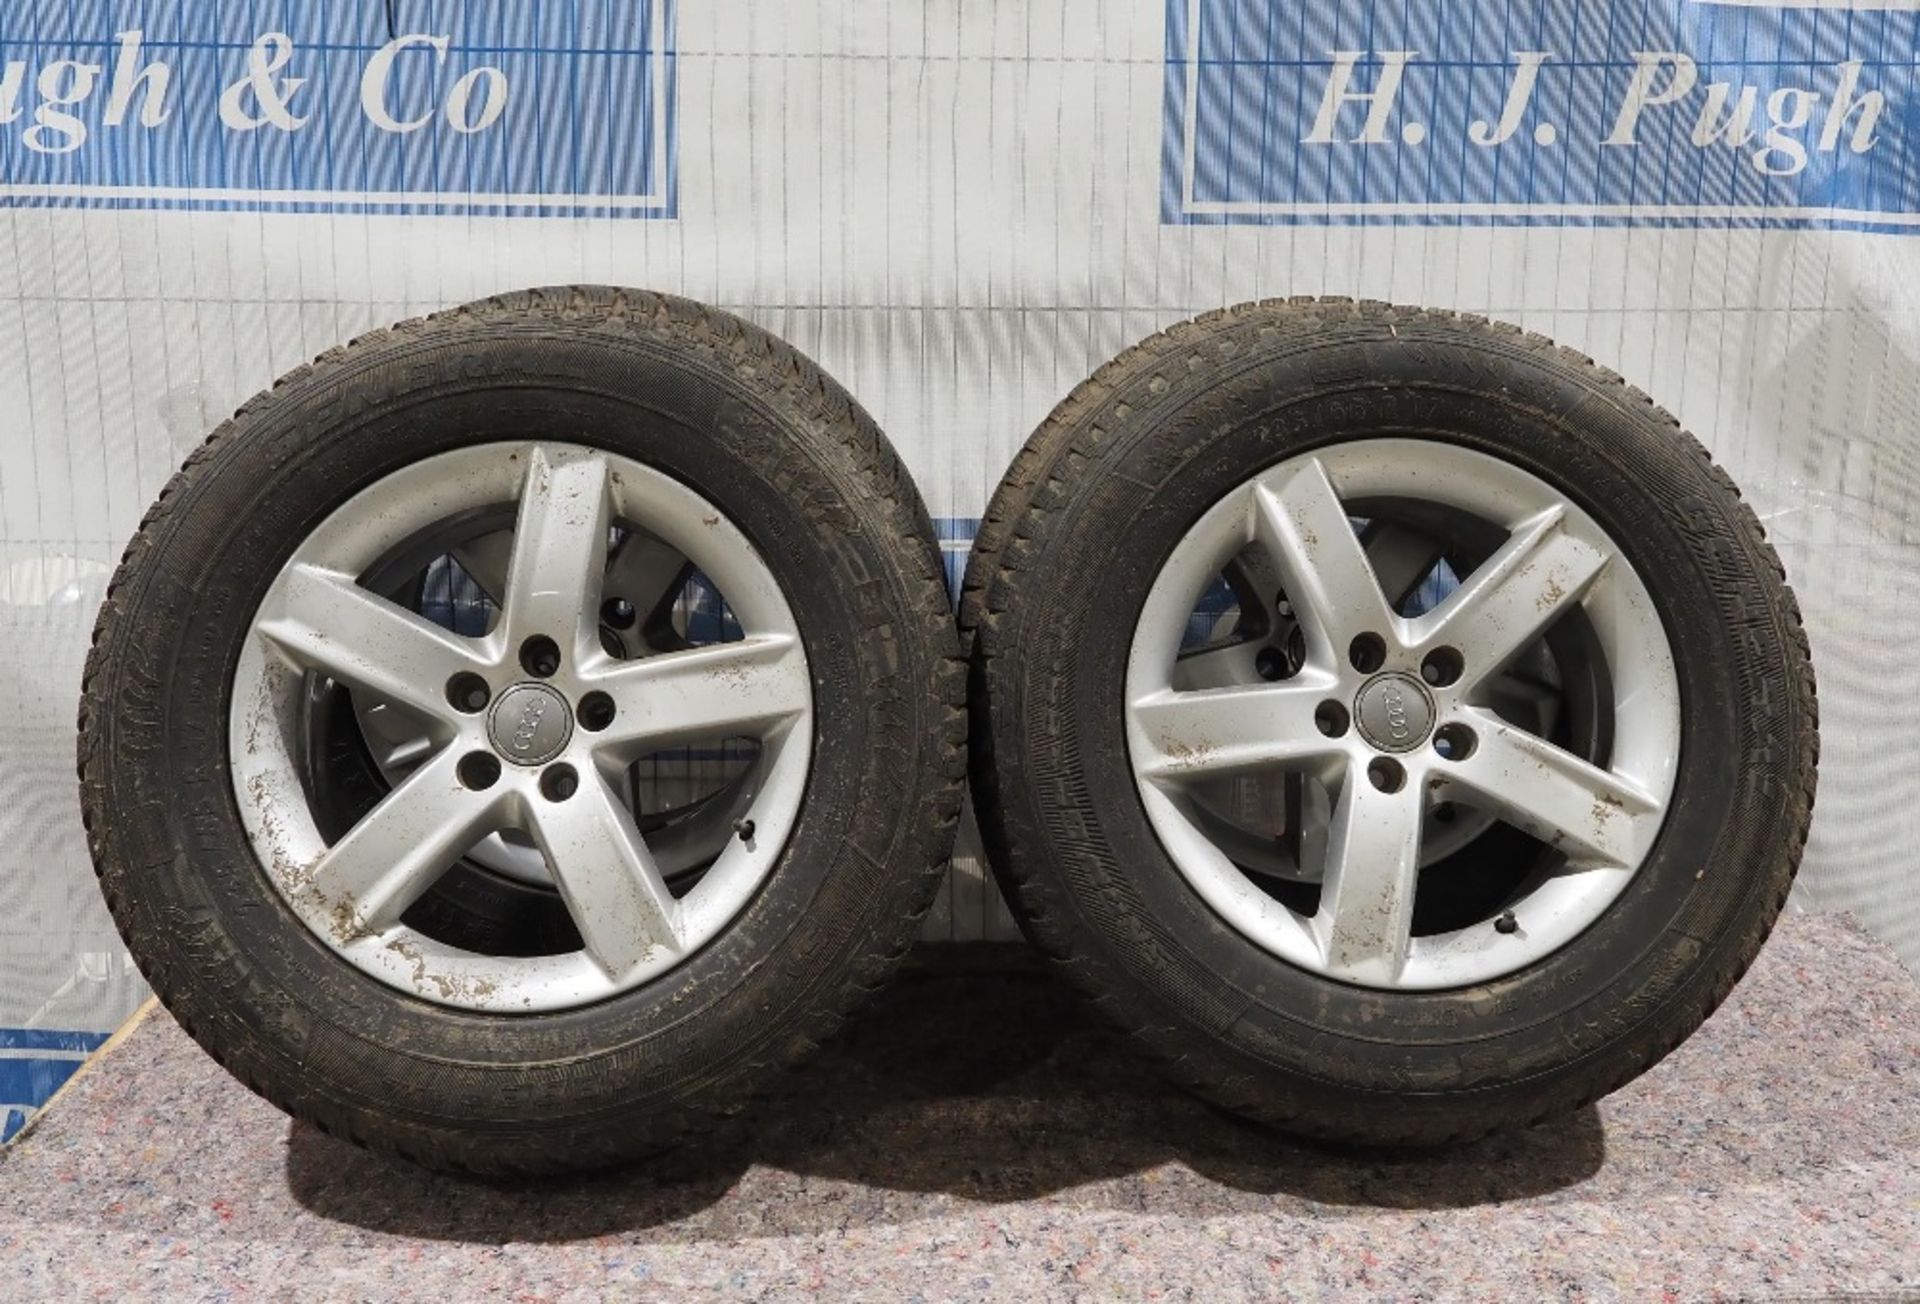 Set of 4 Audi alloys and tyres